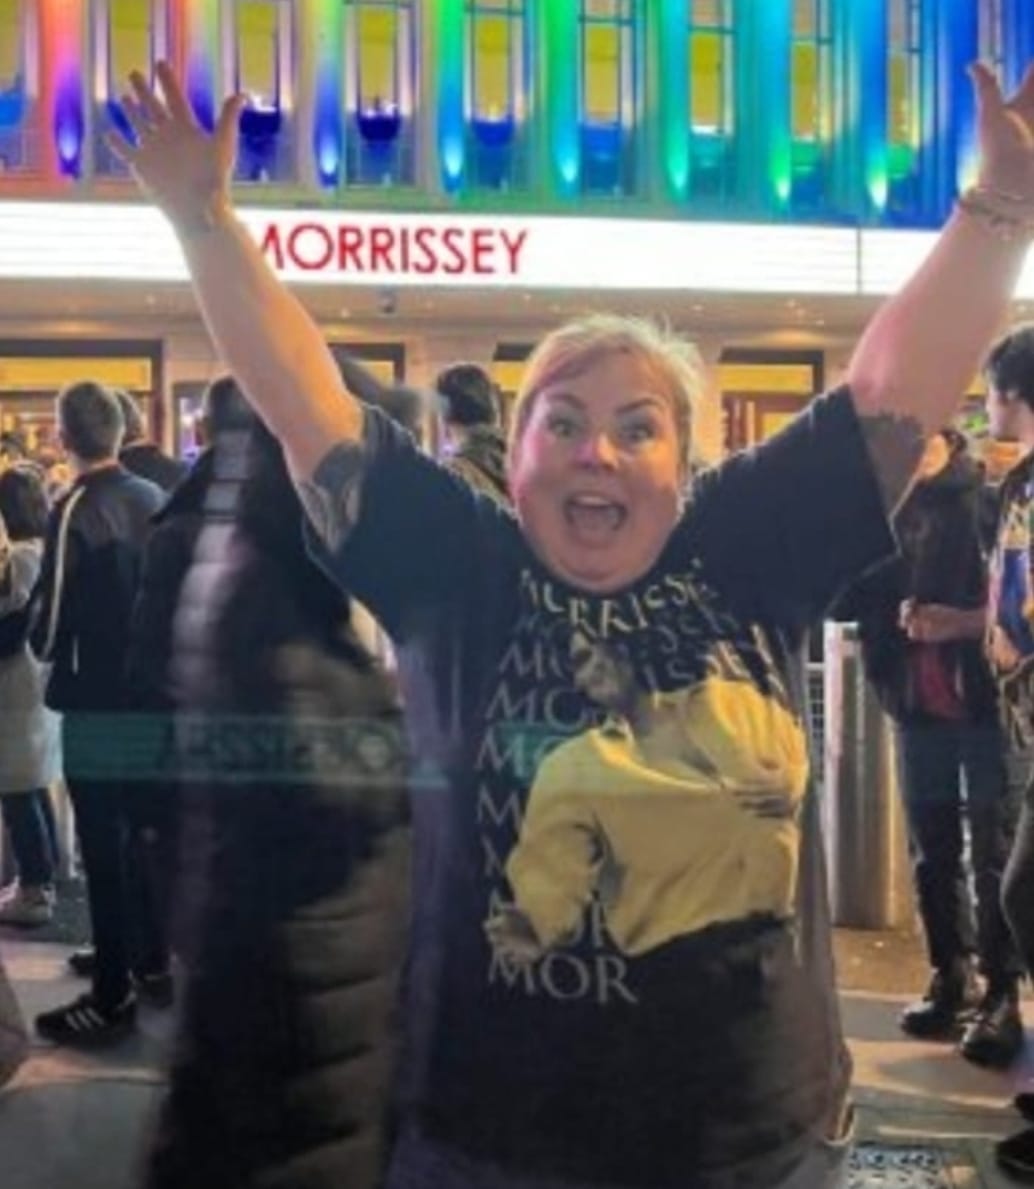 A photo of a woman with her arms in the air- she's celebrating! She is outside a music venue with people in the background and the word "Morrissey" lit up.